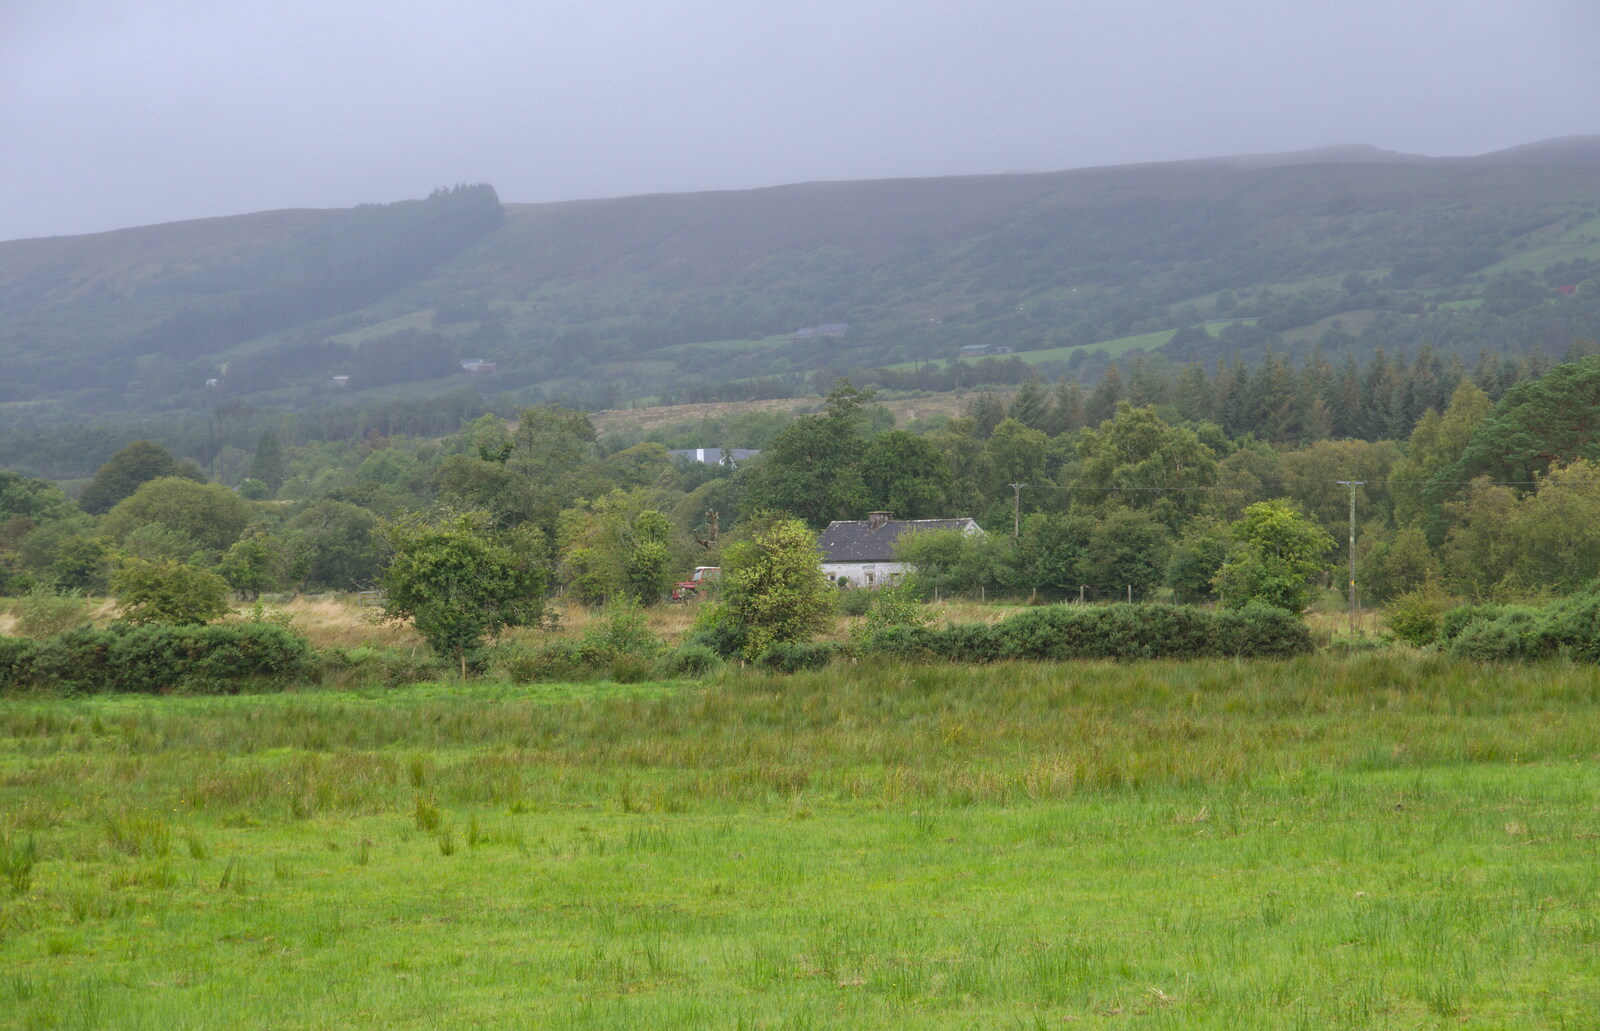 The misty hills near Glenfarne from Travels in the Borderlands: An Blaic/Blacklion to Belcoo and back, Cavan and Fermanagh, Ireland - 22nd August 2019